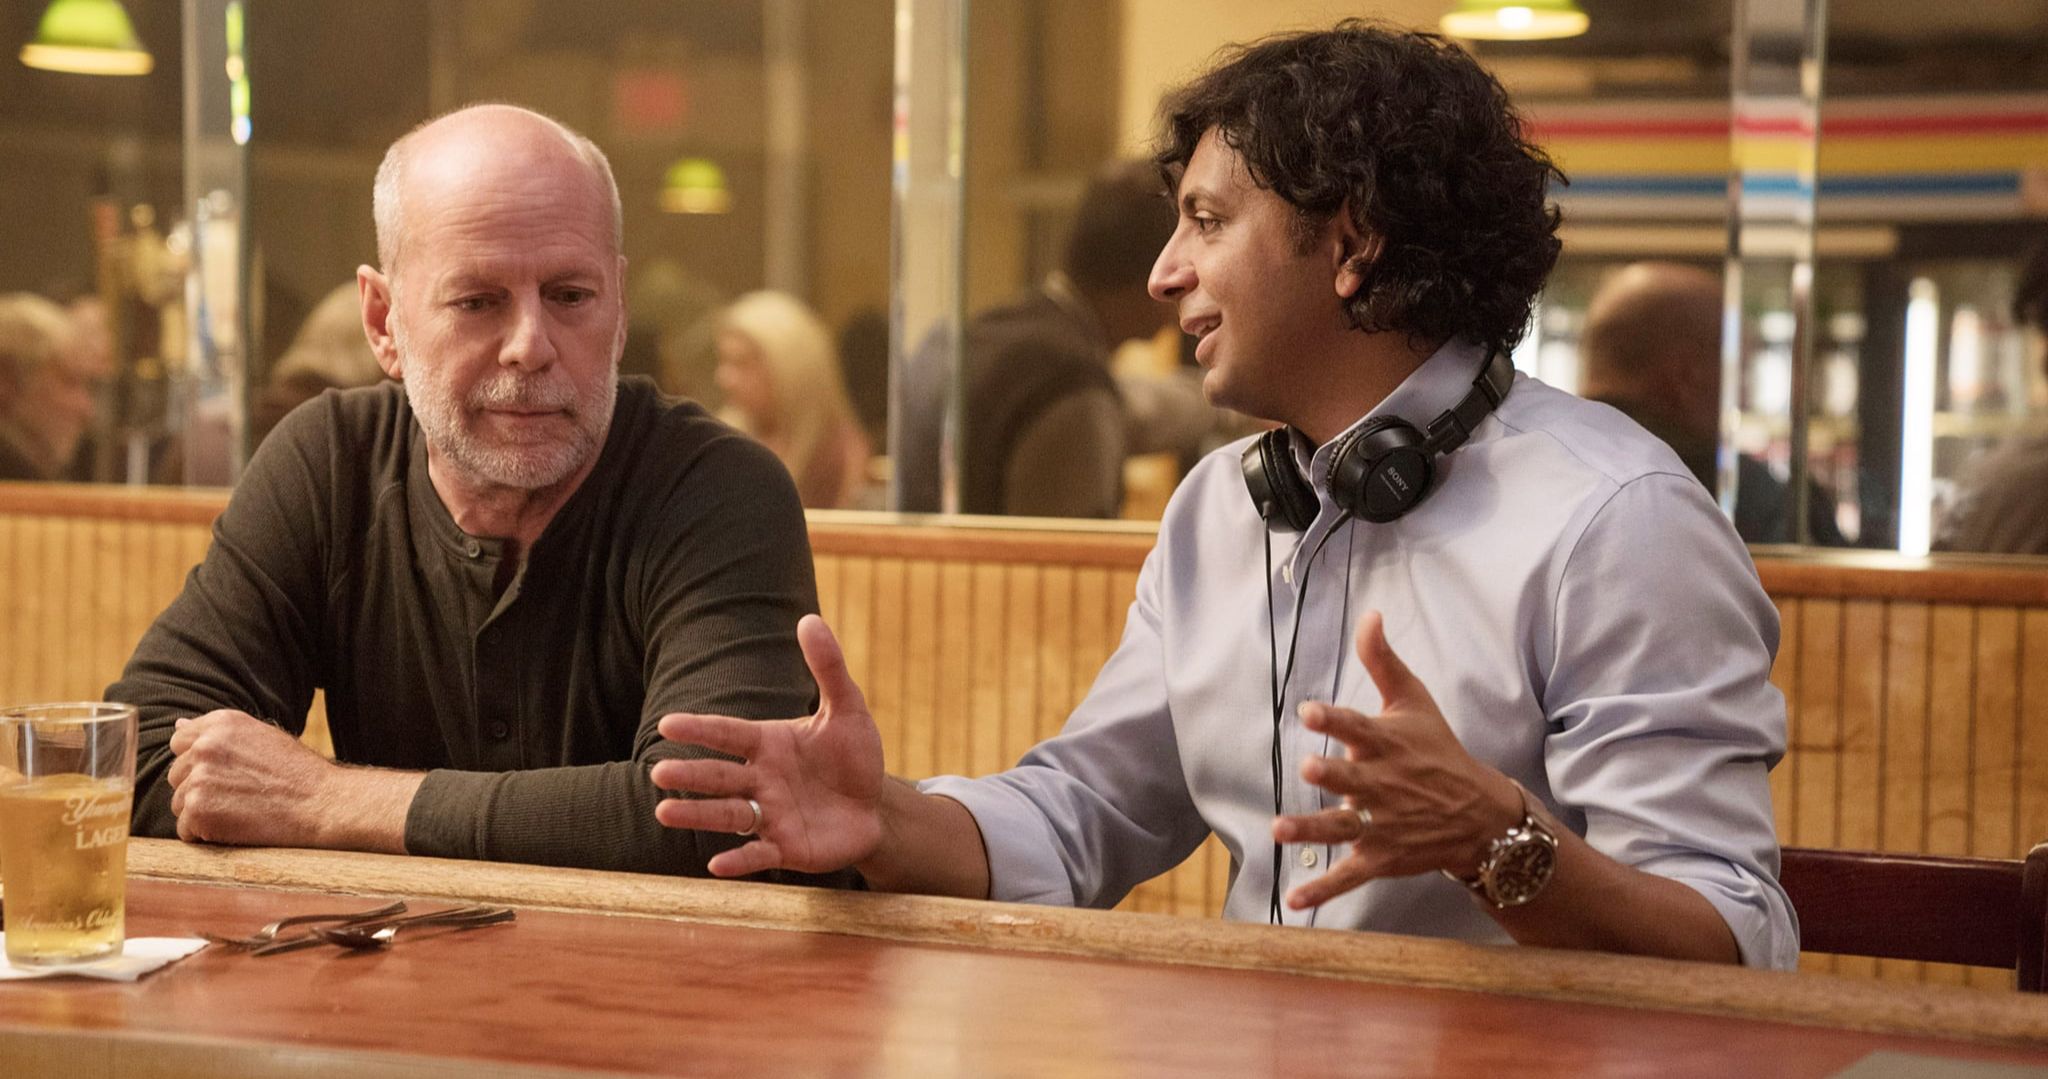 M. Night Shyamalan's Next Movie Lands a Summer 2021 Release Date at Universal